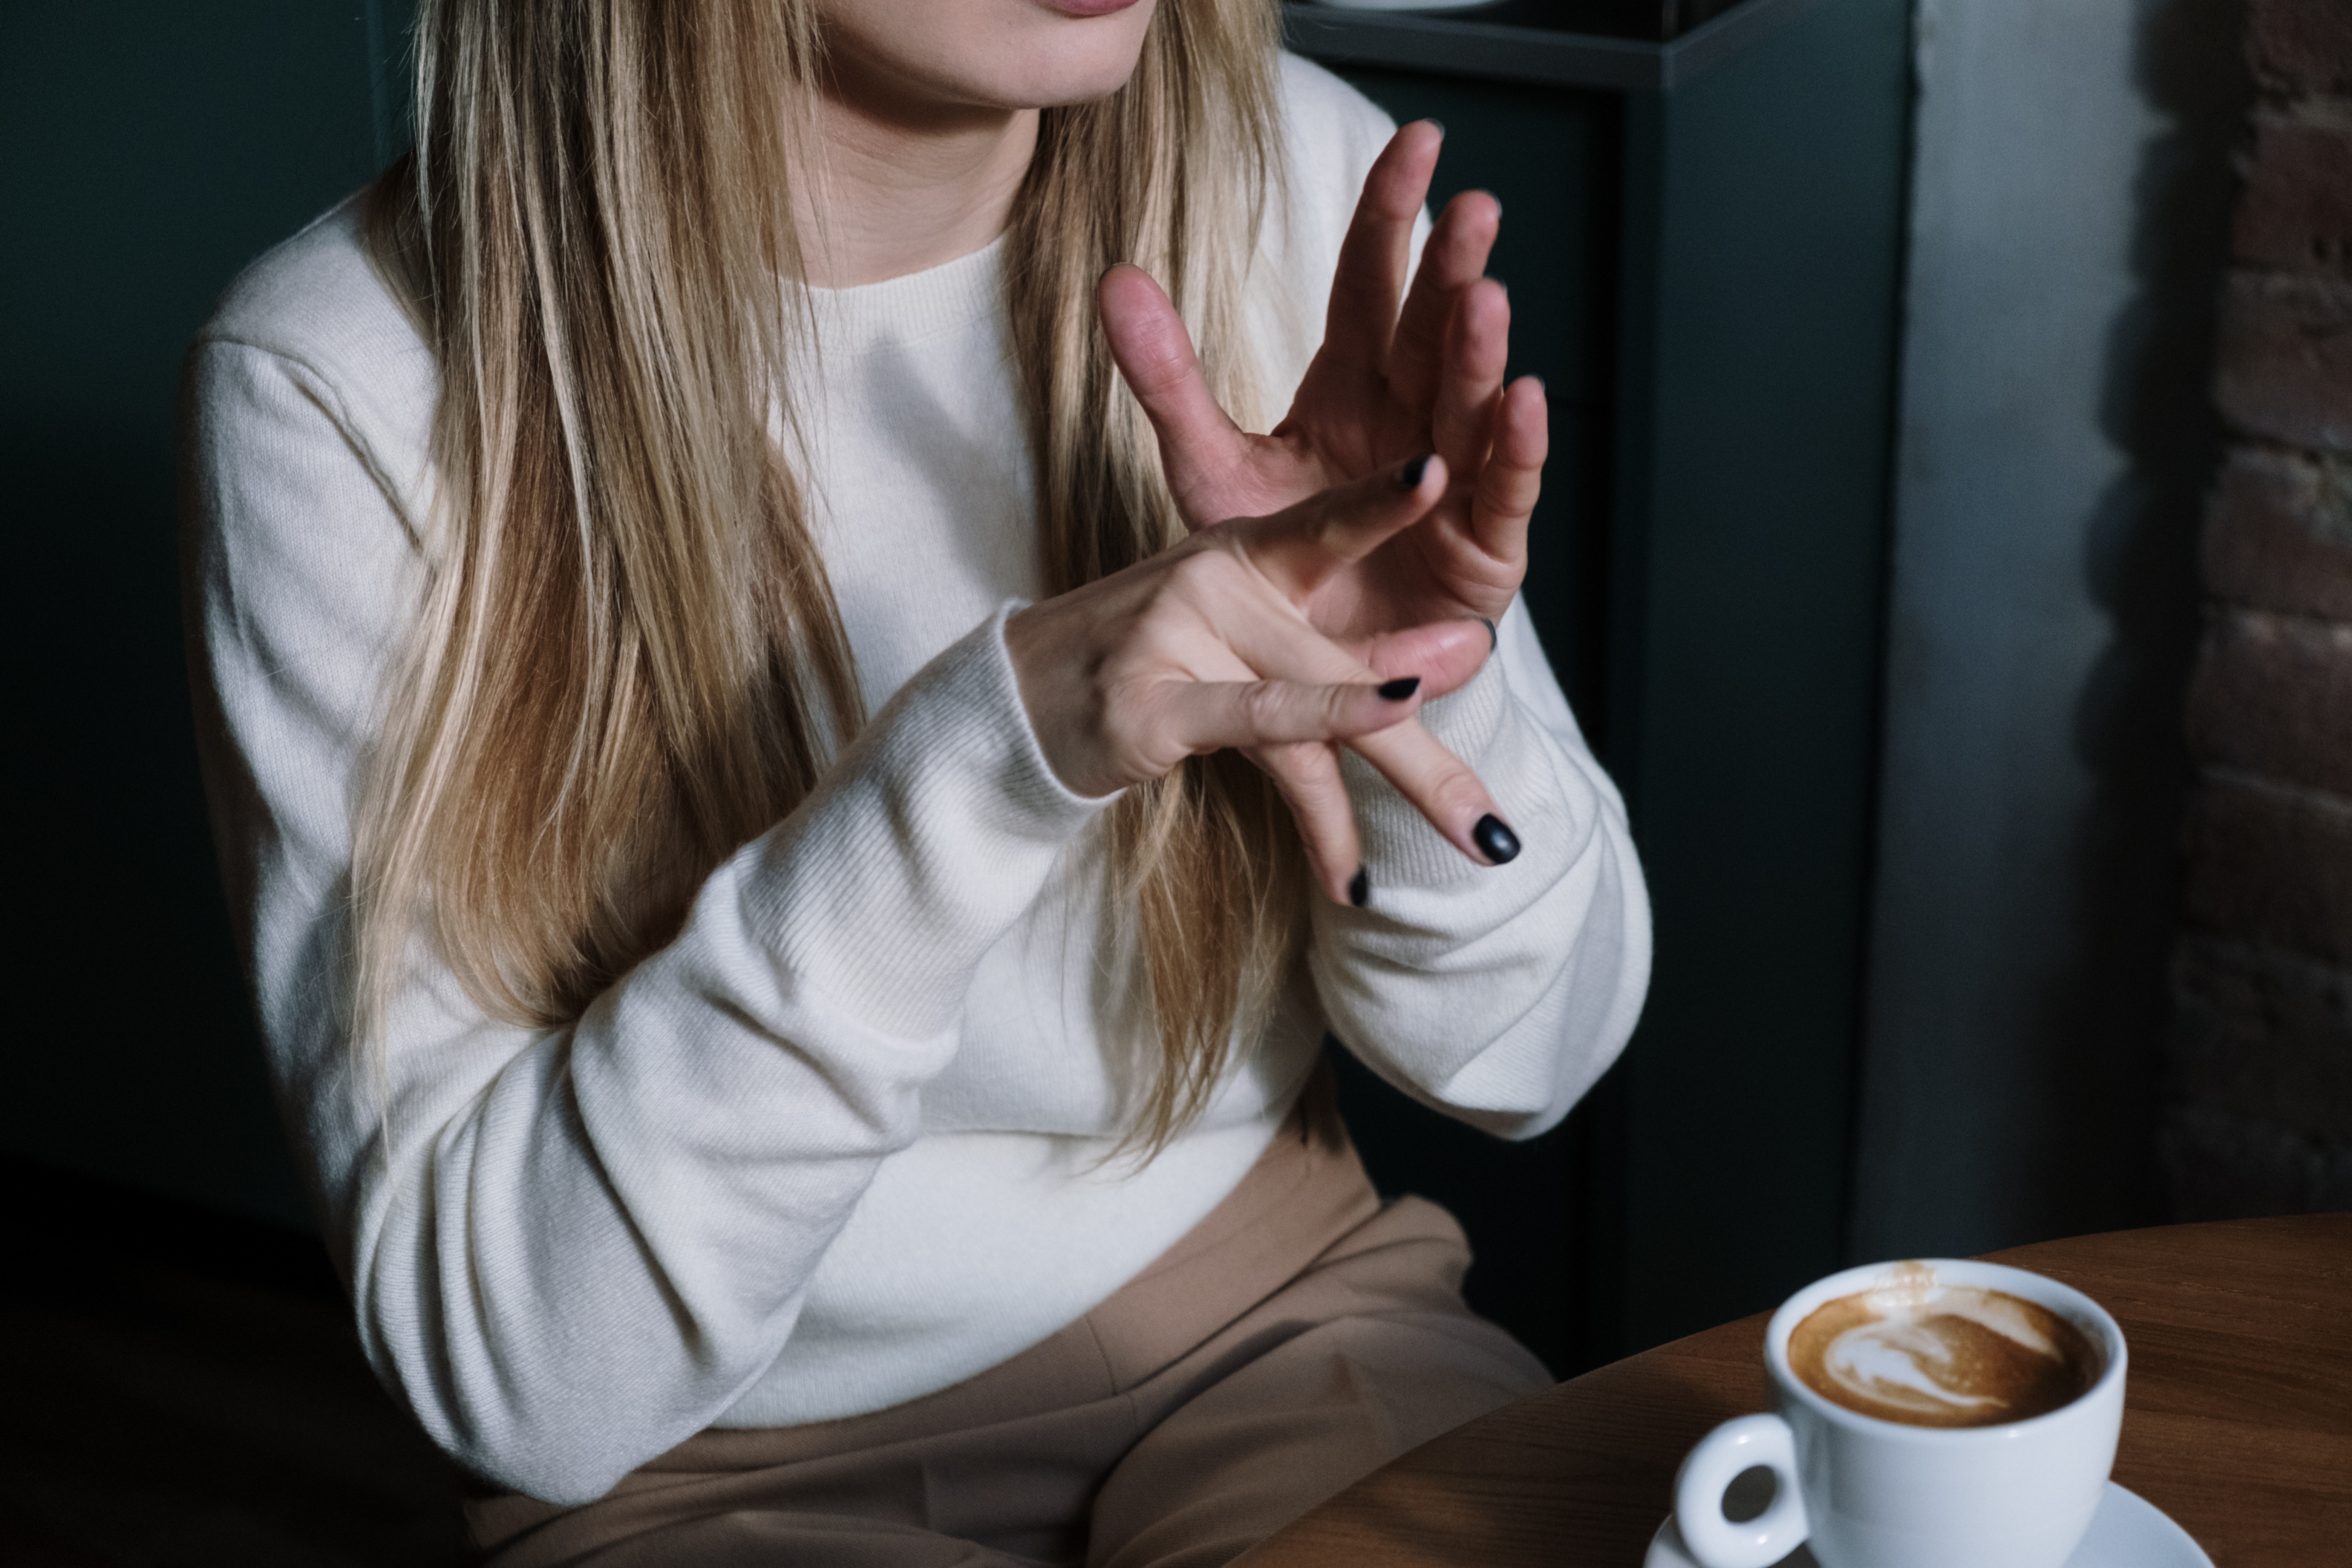 This image shows a woman dressed in a white long sleeve t-shirt sitting in a coffee shop with coffee on the table. She appears to be showing or gesturing with her hands to someone.